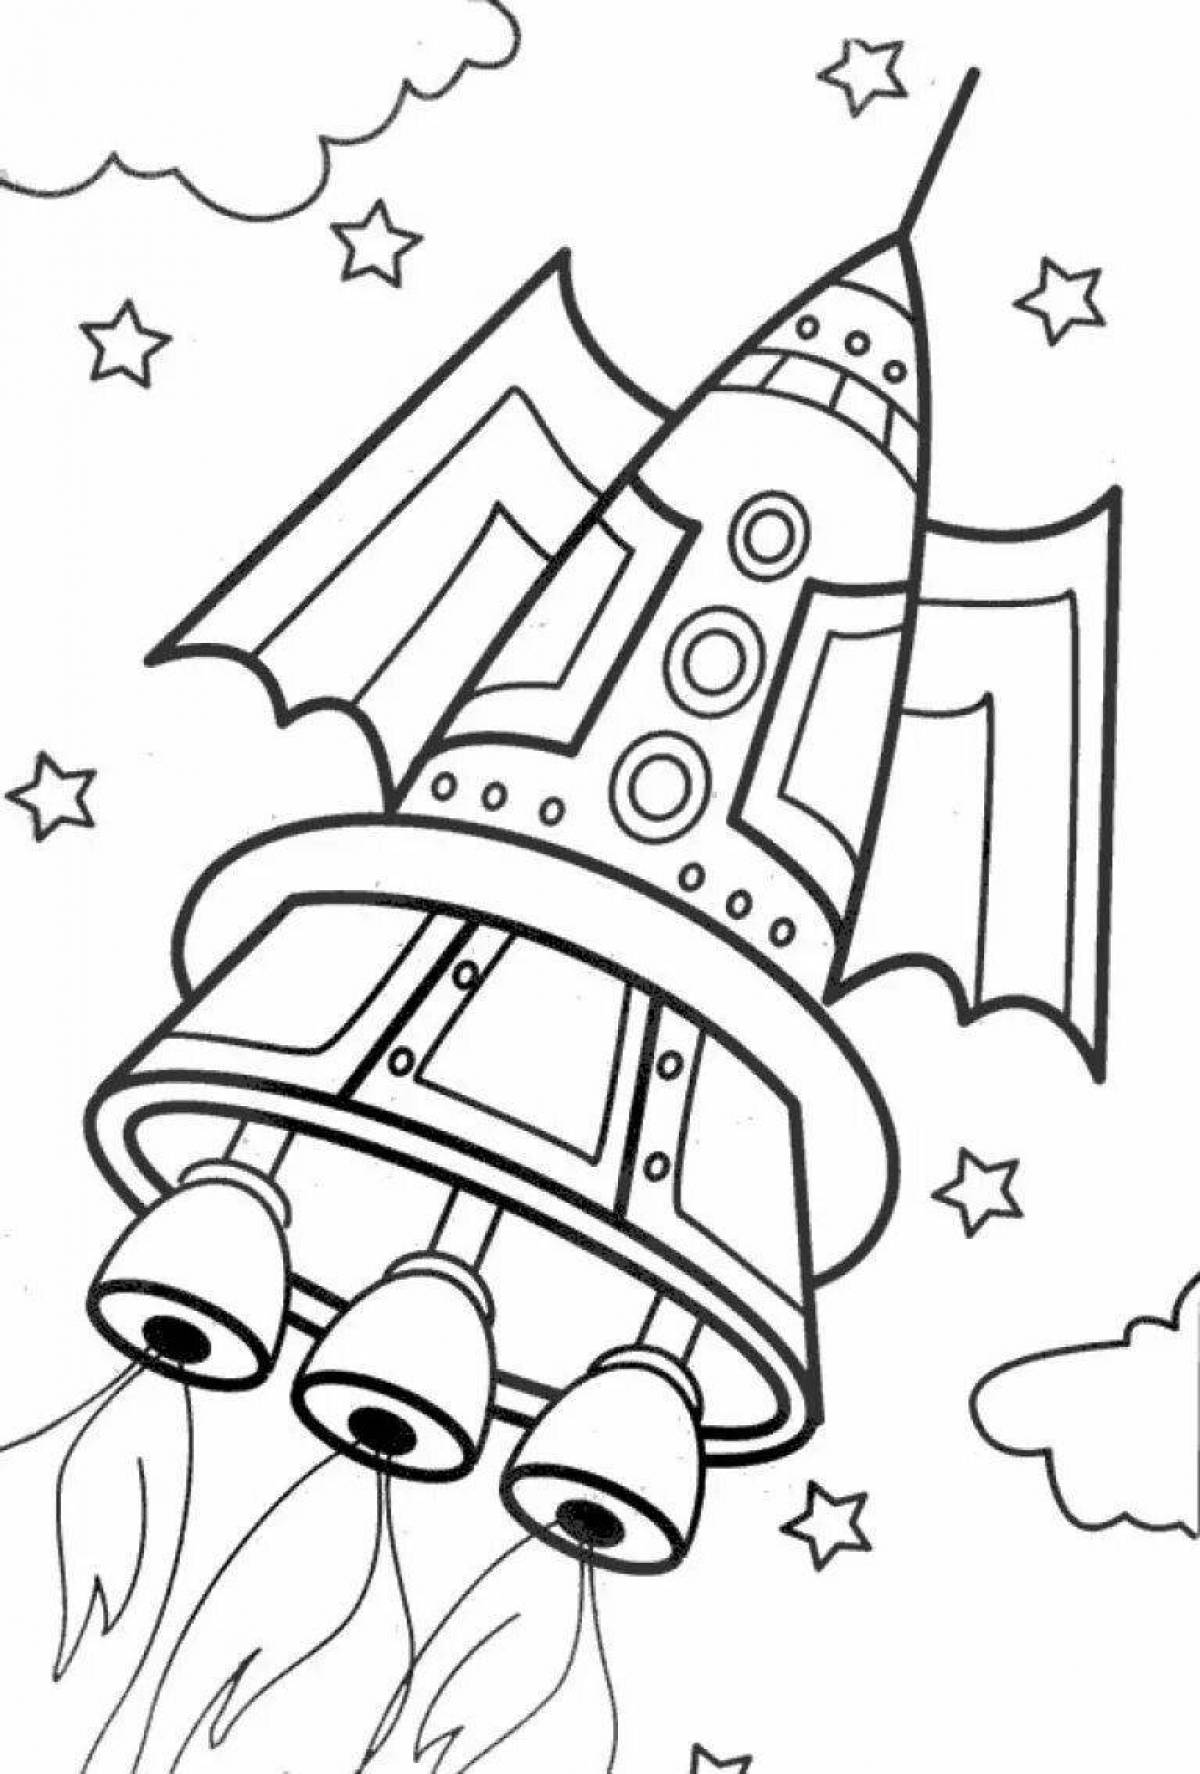 Radiant space rocket coloring page